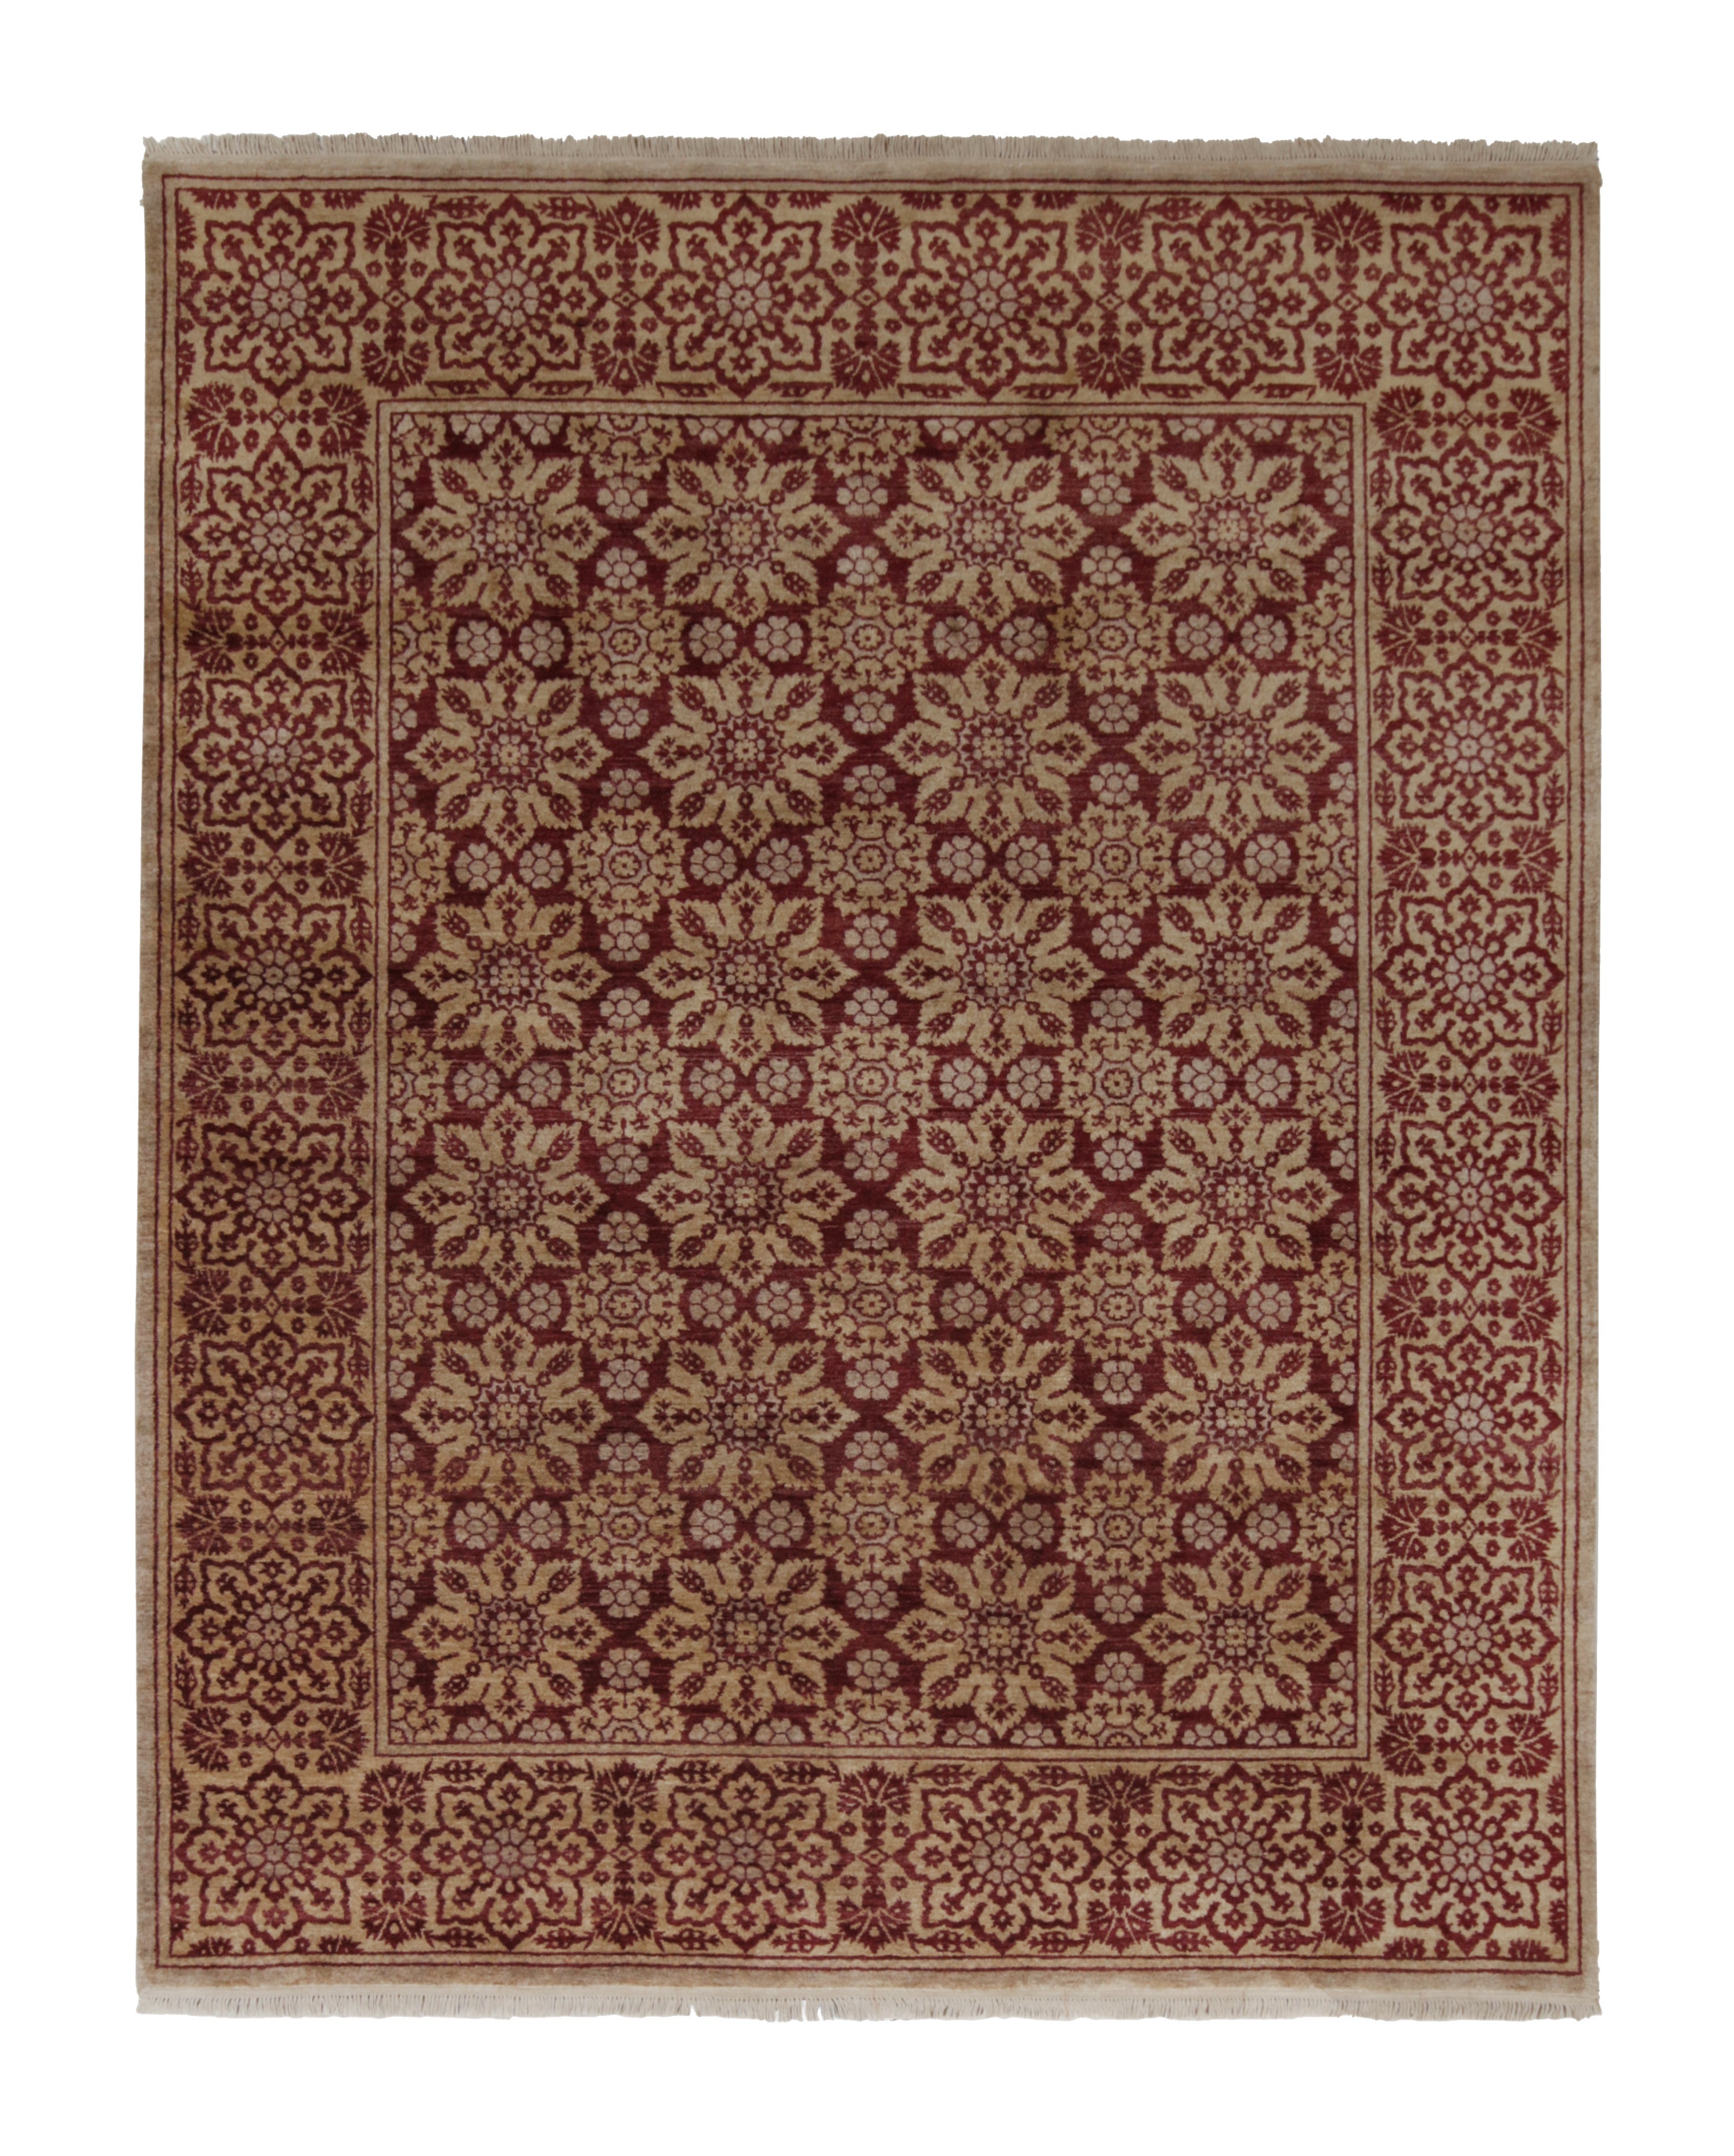 Rug & Kilim’s European Style Rug with Maroon & Gold Floral Pattern For Sale